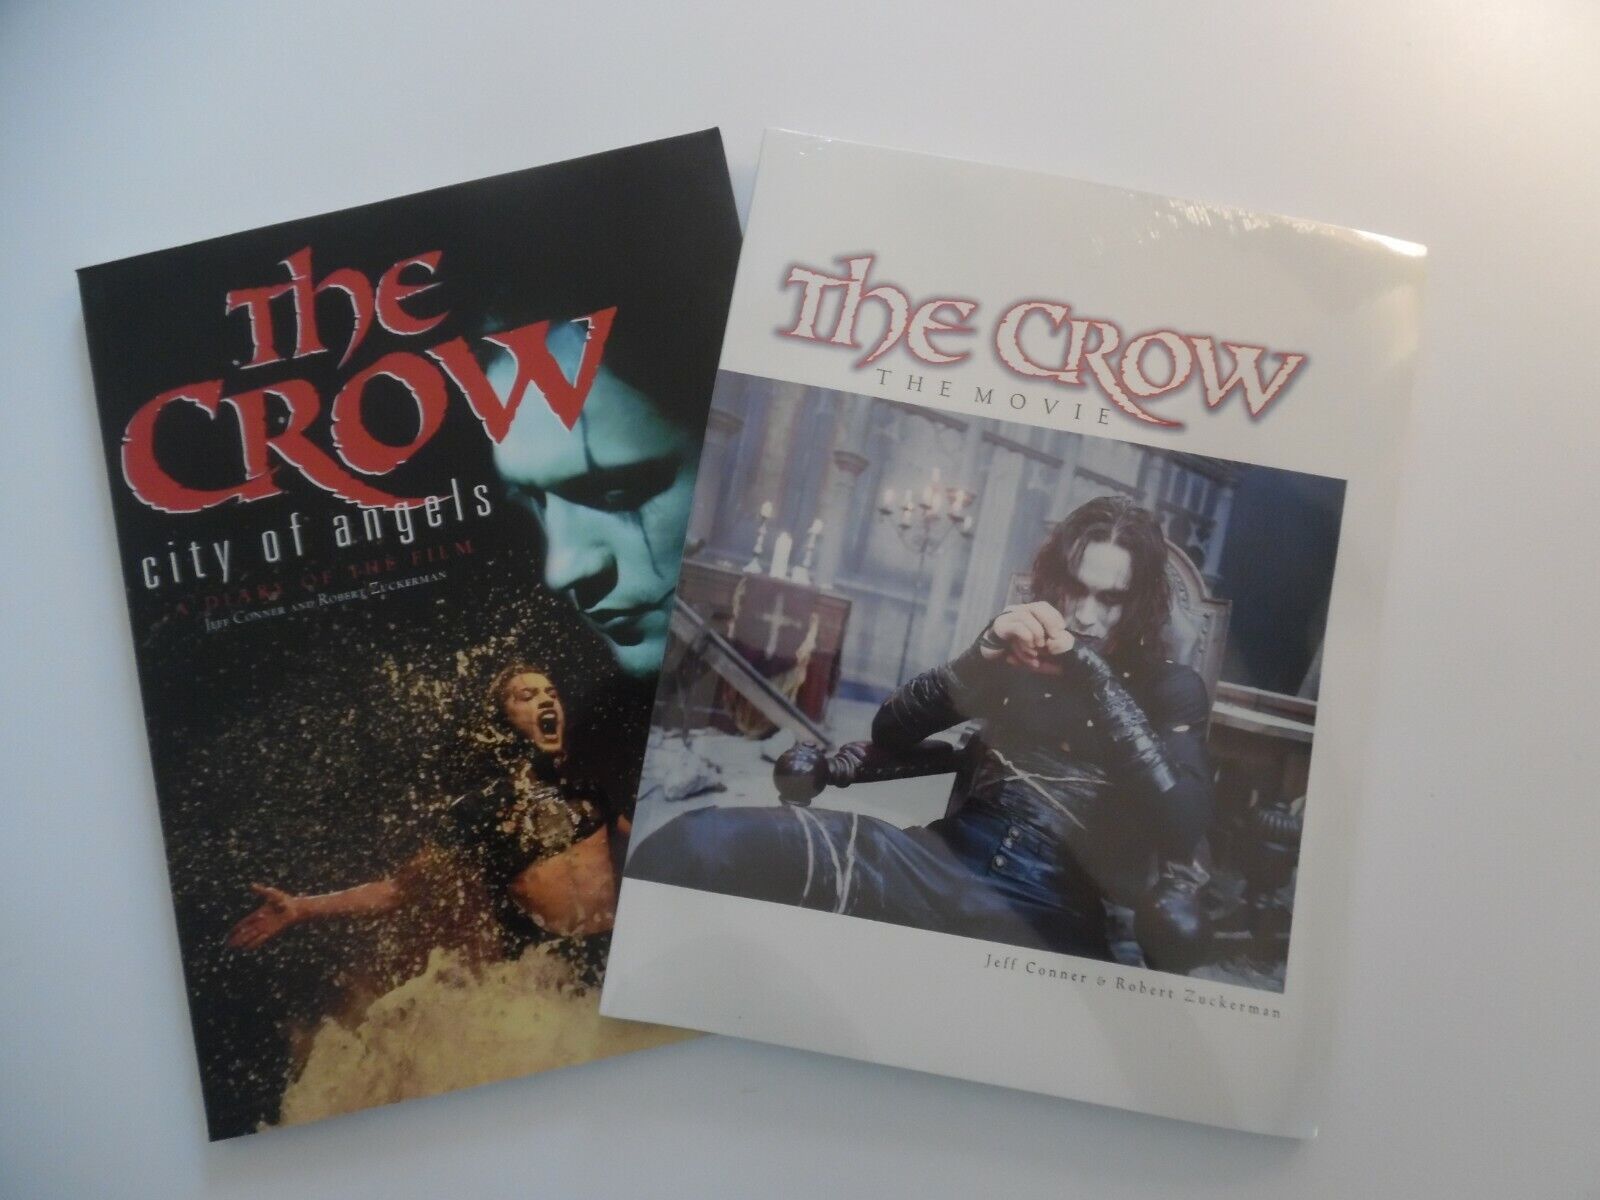 CROW THE MOVIE- CITY OF ANGELS - 2 BOOK LOT -  BRANDON LEE KITCHEN SINK